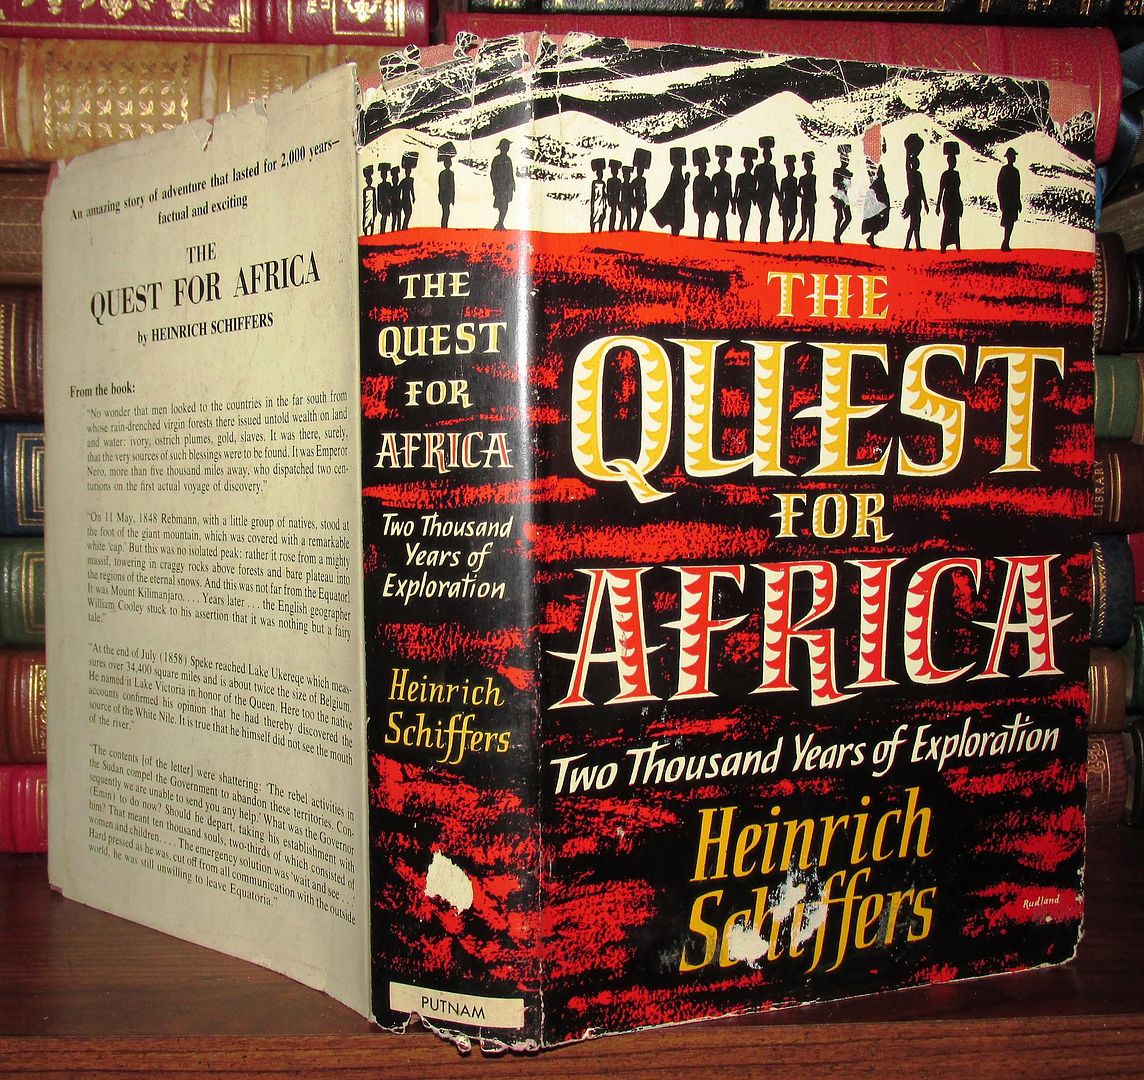 SCHIFFERS, HEINRICH - Quest for Africa : Two Thousand Years of Exploration